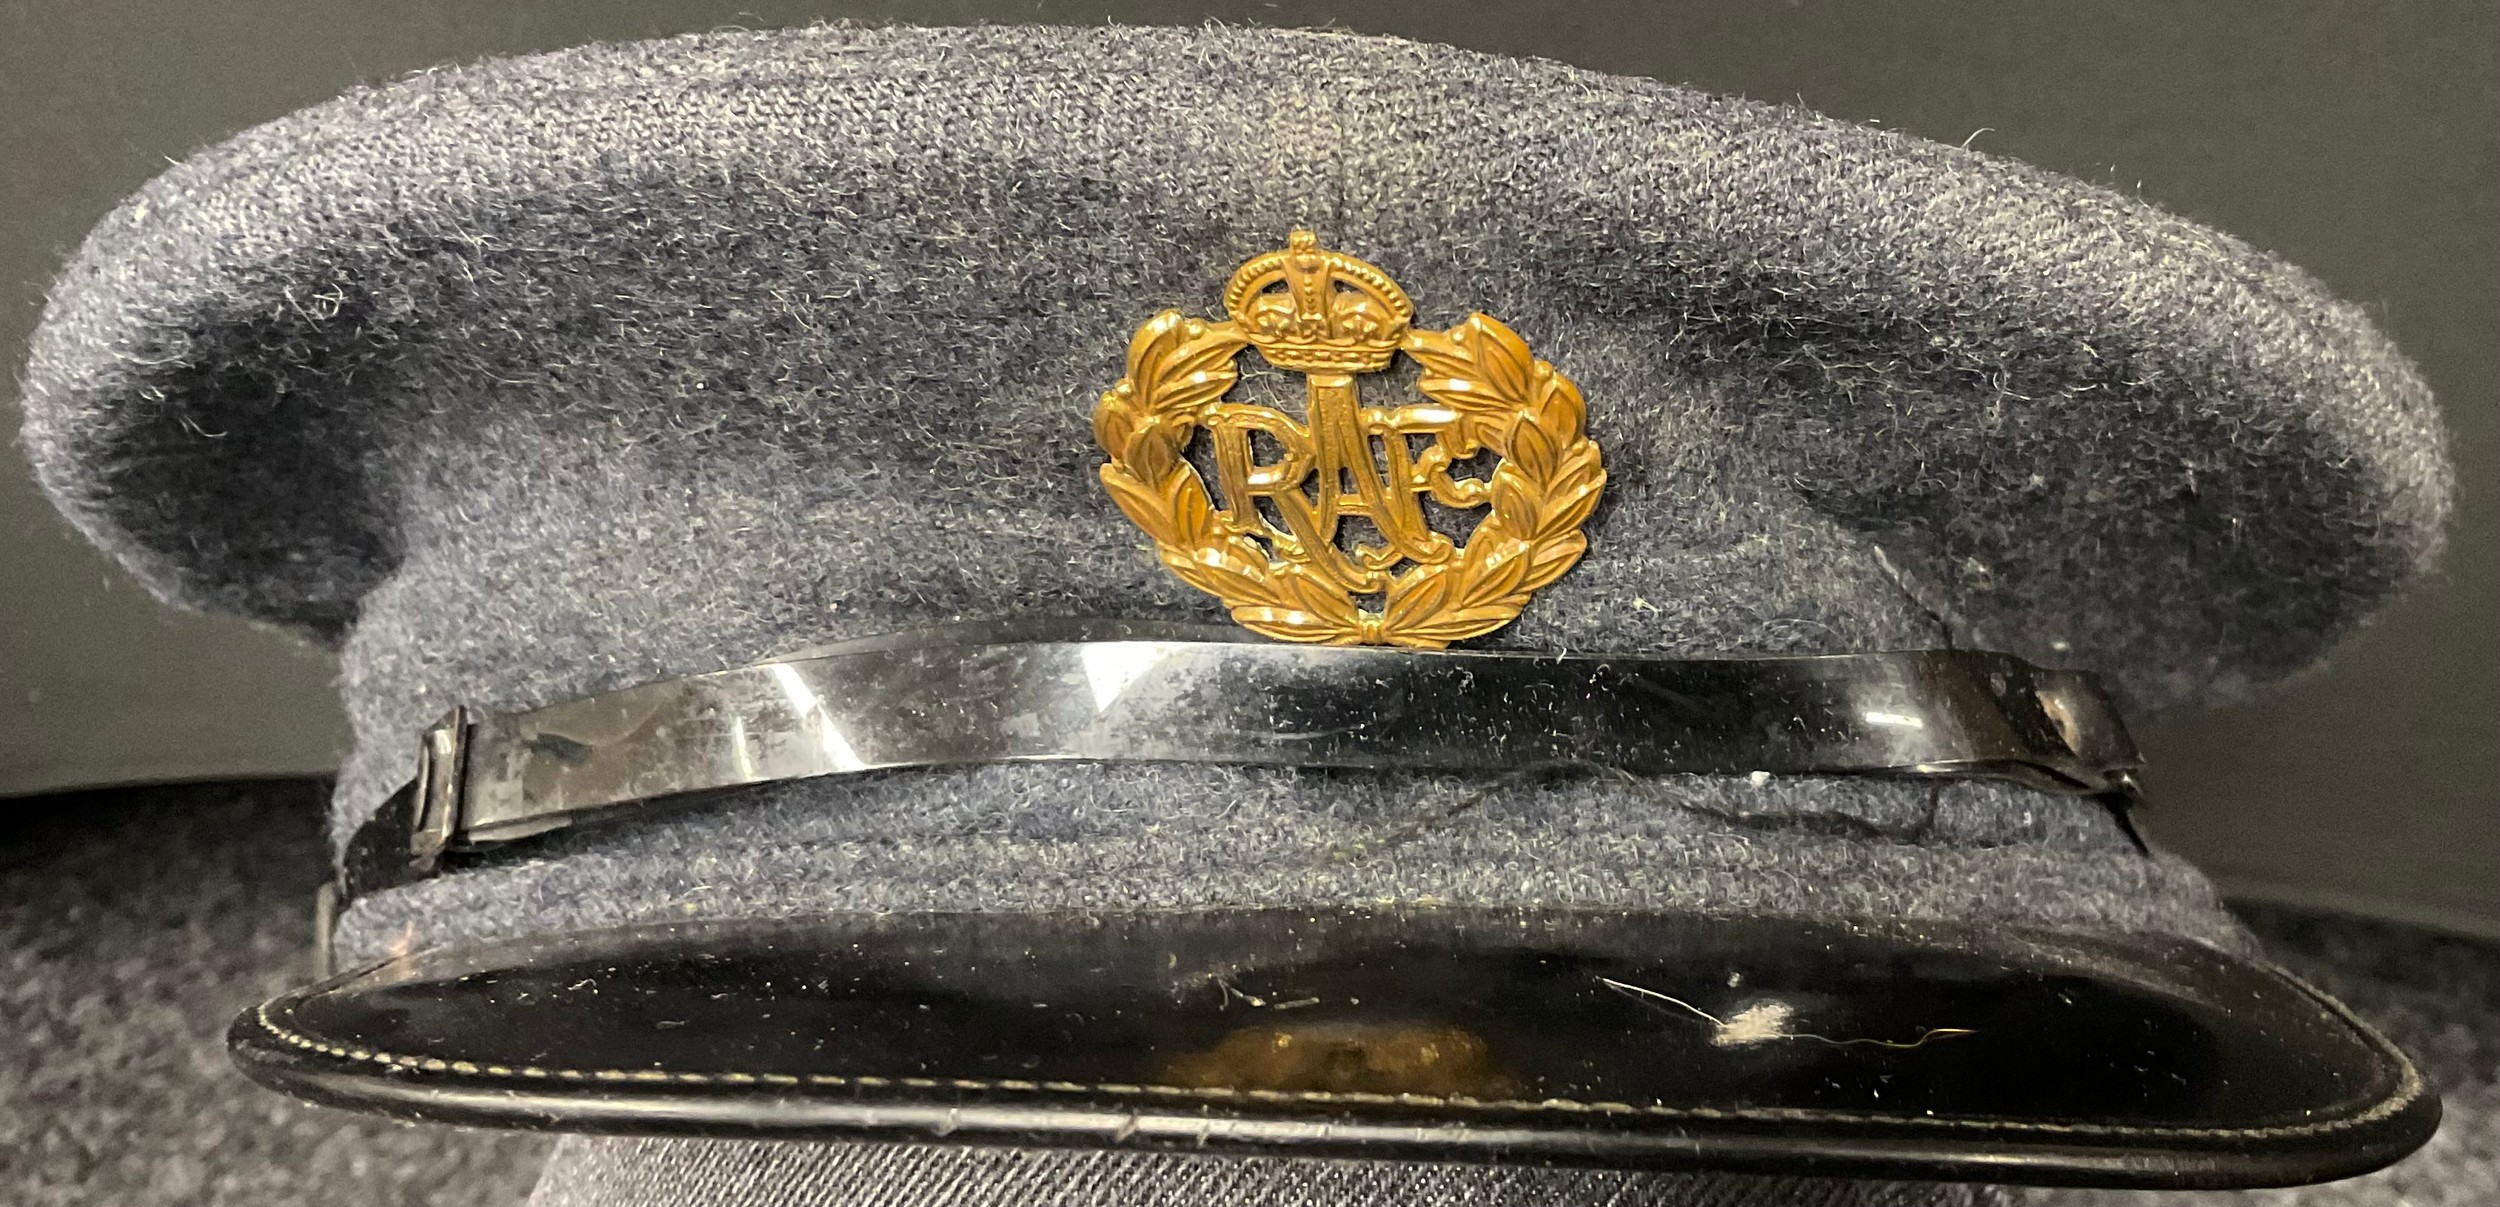 RAF Other Airmans Service Dress cap with Kings Crown Cap Badge (Missing Black Cap Band) no makers - Image 2 of 2